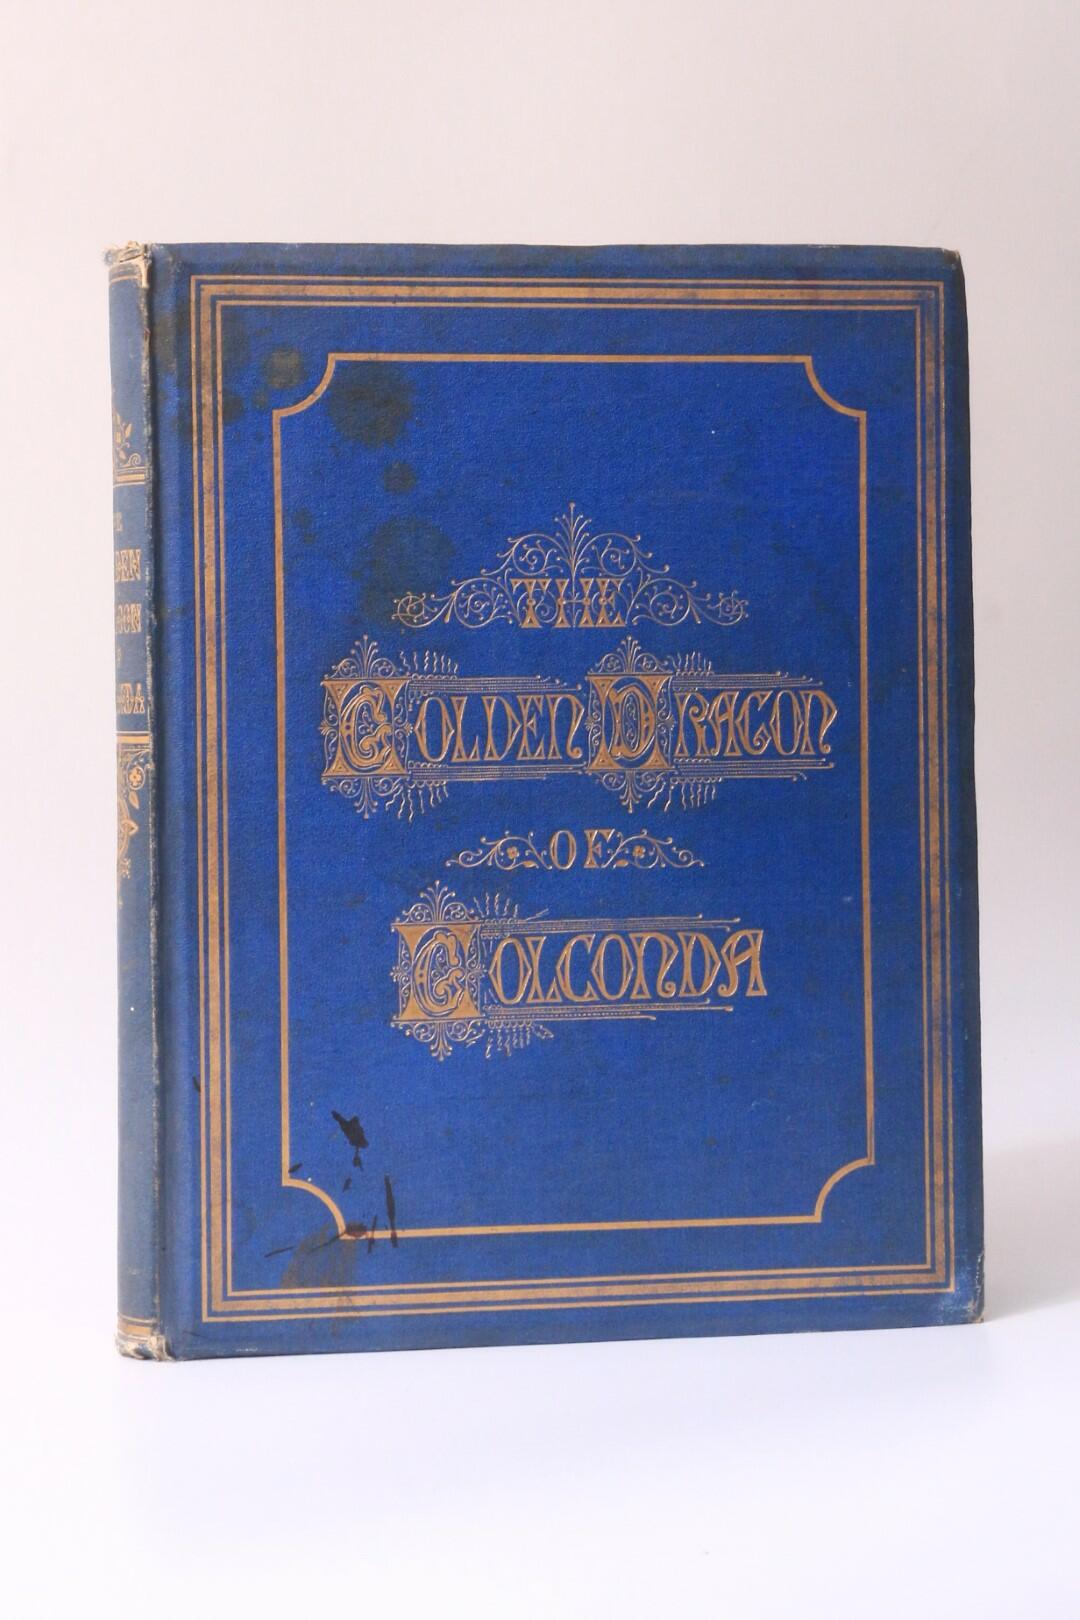 George Flamank - The Golden Dragon of Golconda - Canford Manor, Privately Printed, 1865, First Edition.